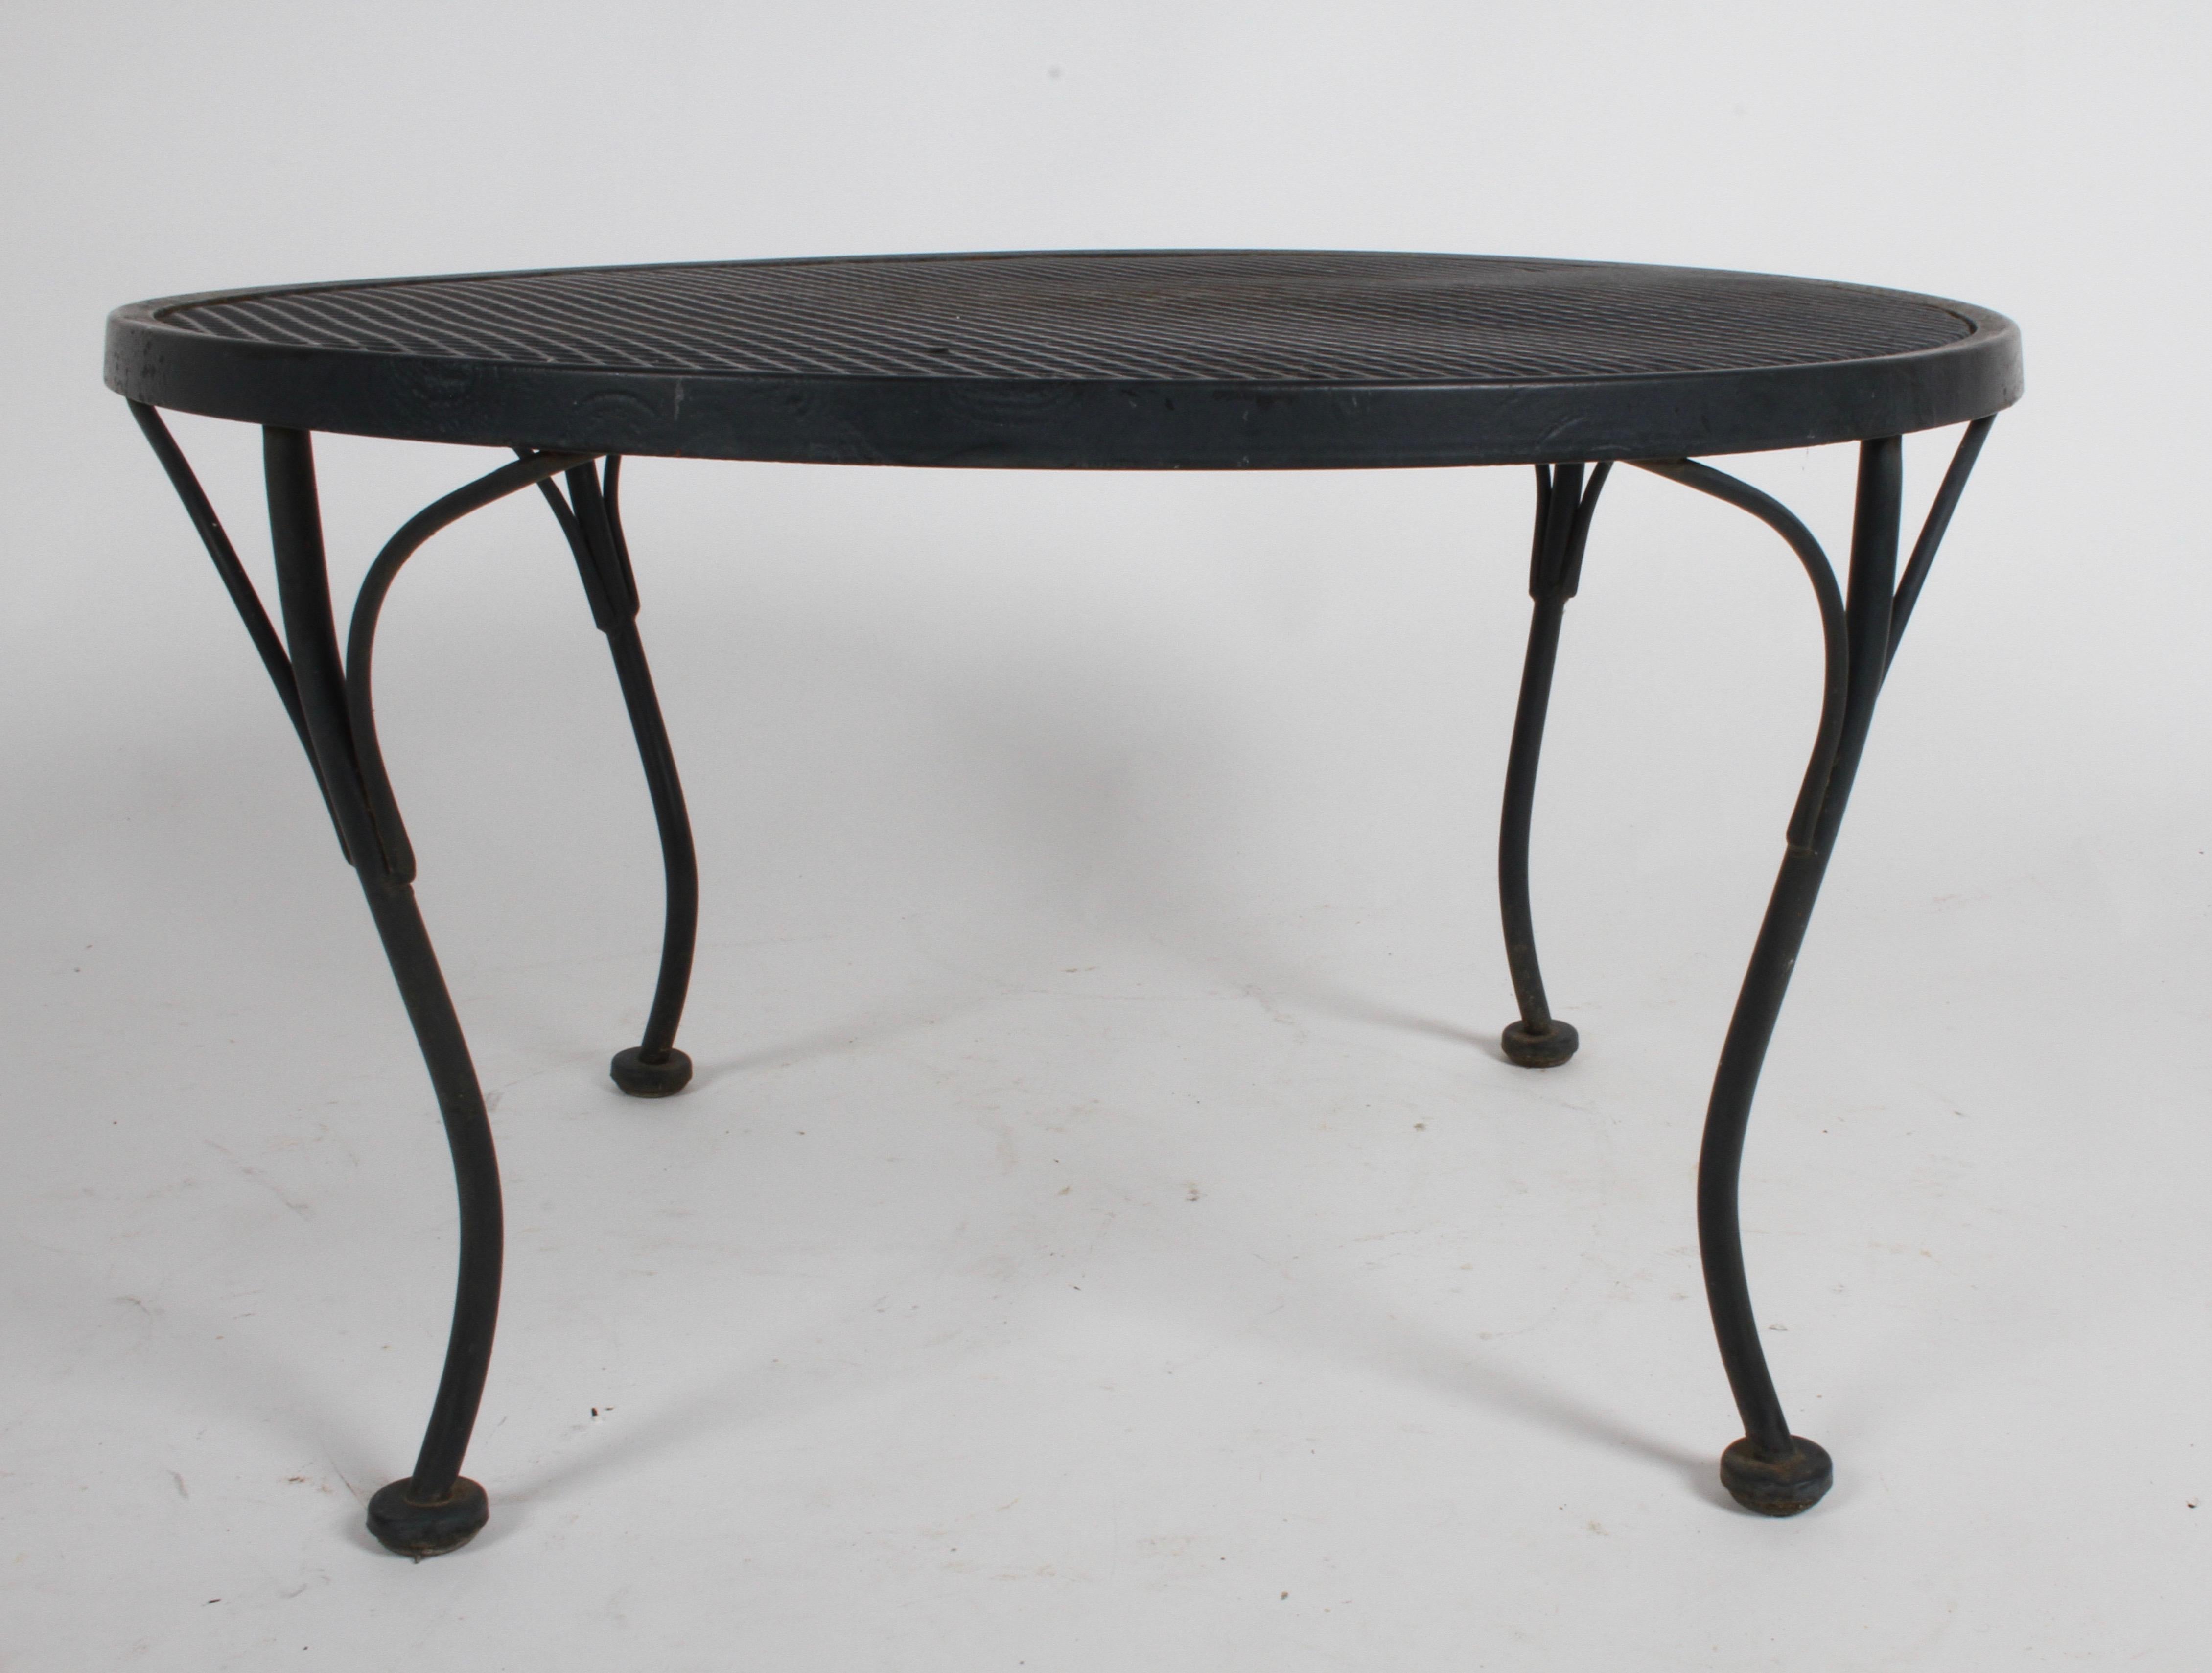 Russell Woodard designed round coffee or side often see along side his Sculptura line chairs and settees. Shown in original black paint, from one owner estate, circa 1950s. Two available. Overall very nice condition, lite rust. Can be refinished if